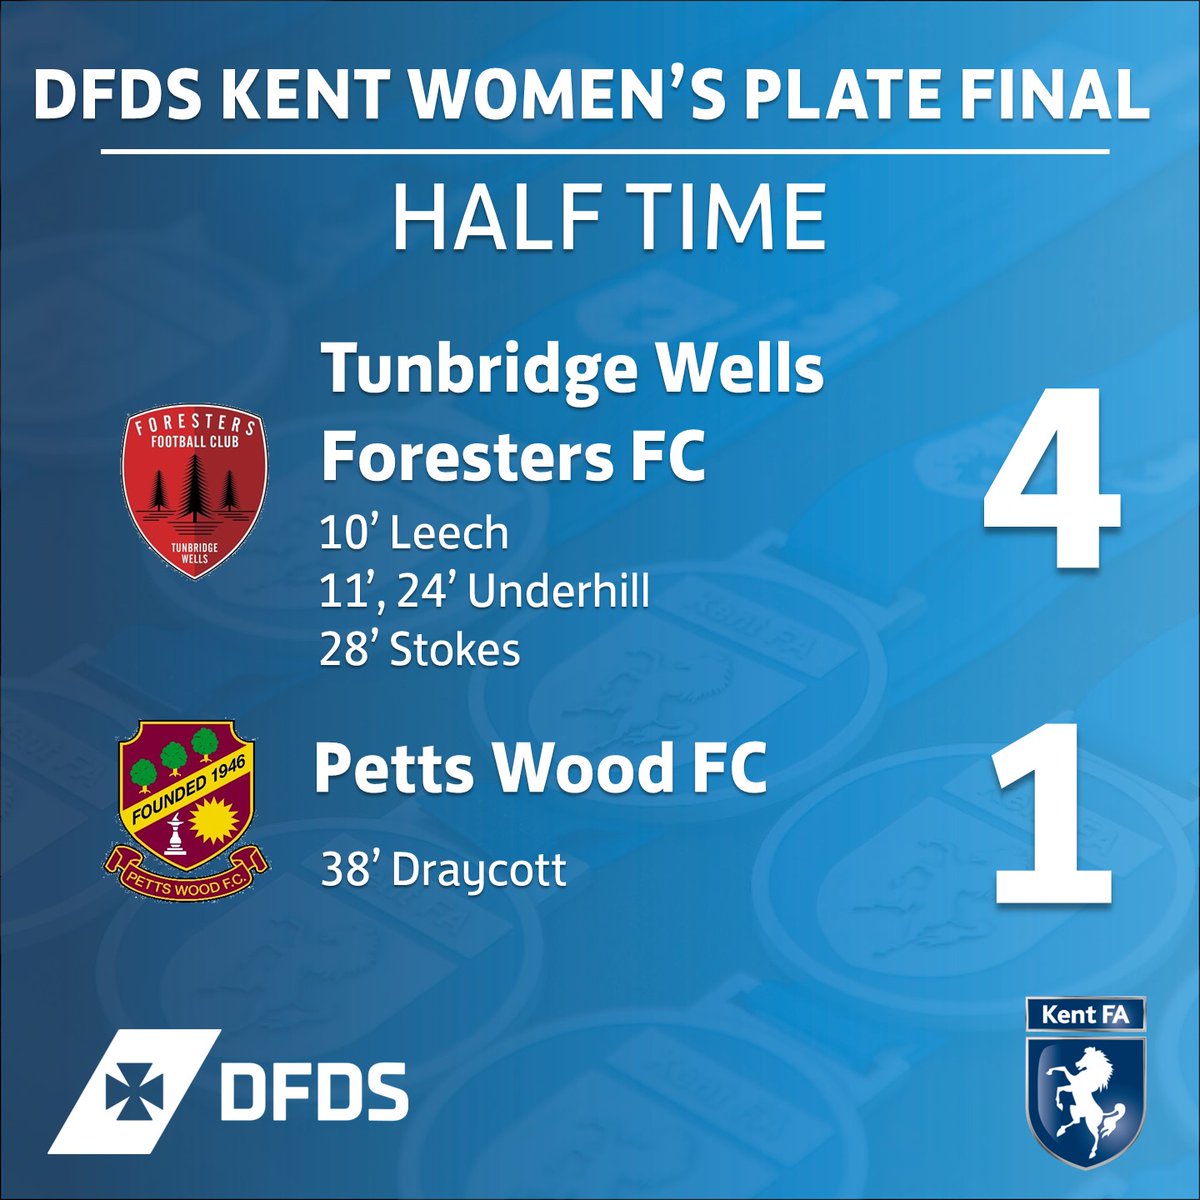 It's half-time here at the DFDS Kent Women's Plate Final 🏆
@ForestersLadies @PettsWood_FC @Pettswoodladies
@dfds_uk #MagicoftheCups #KentFootball